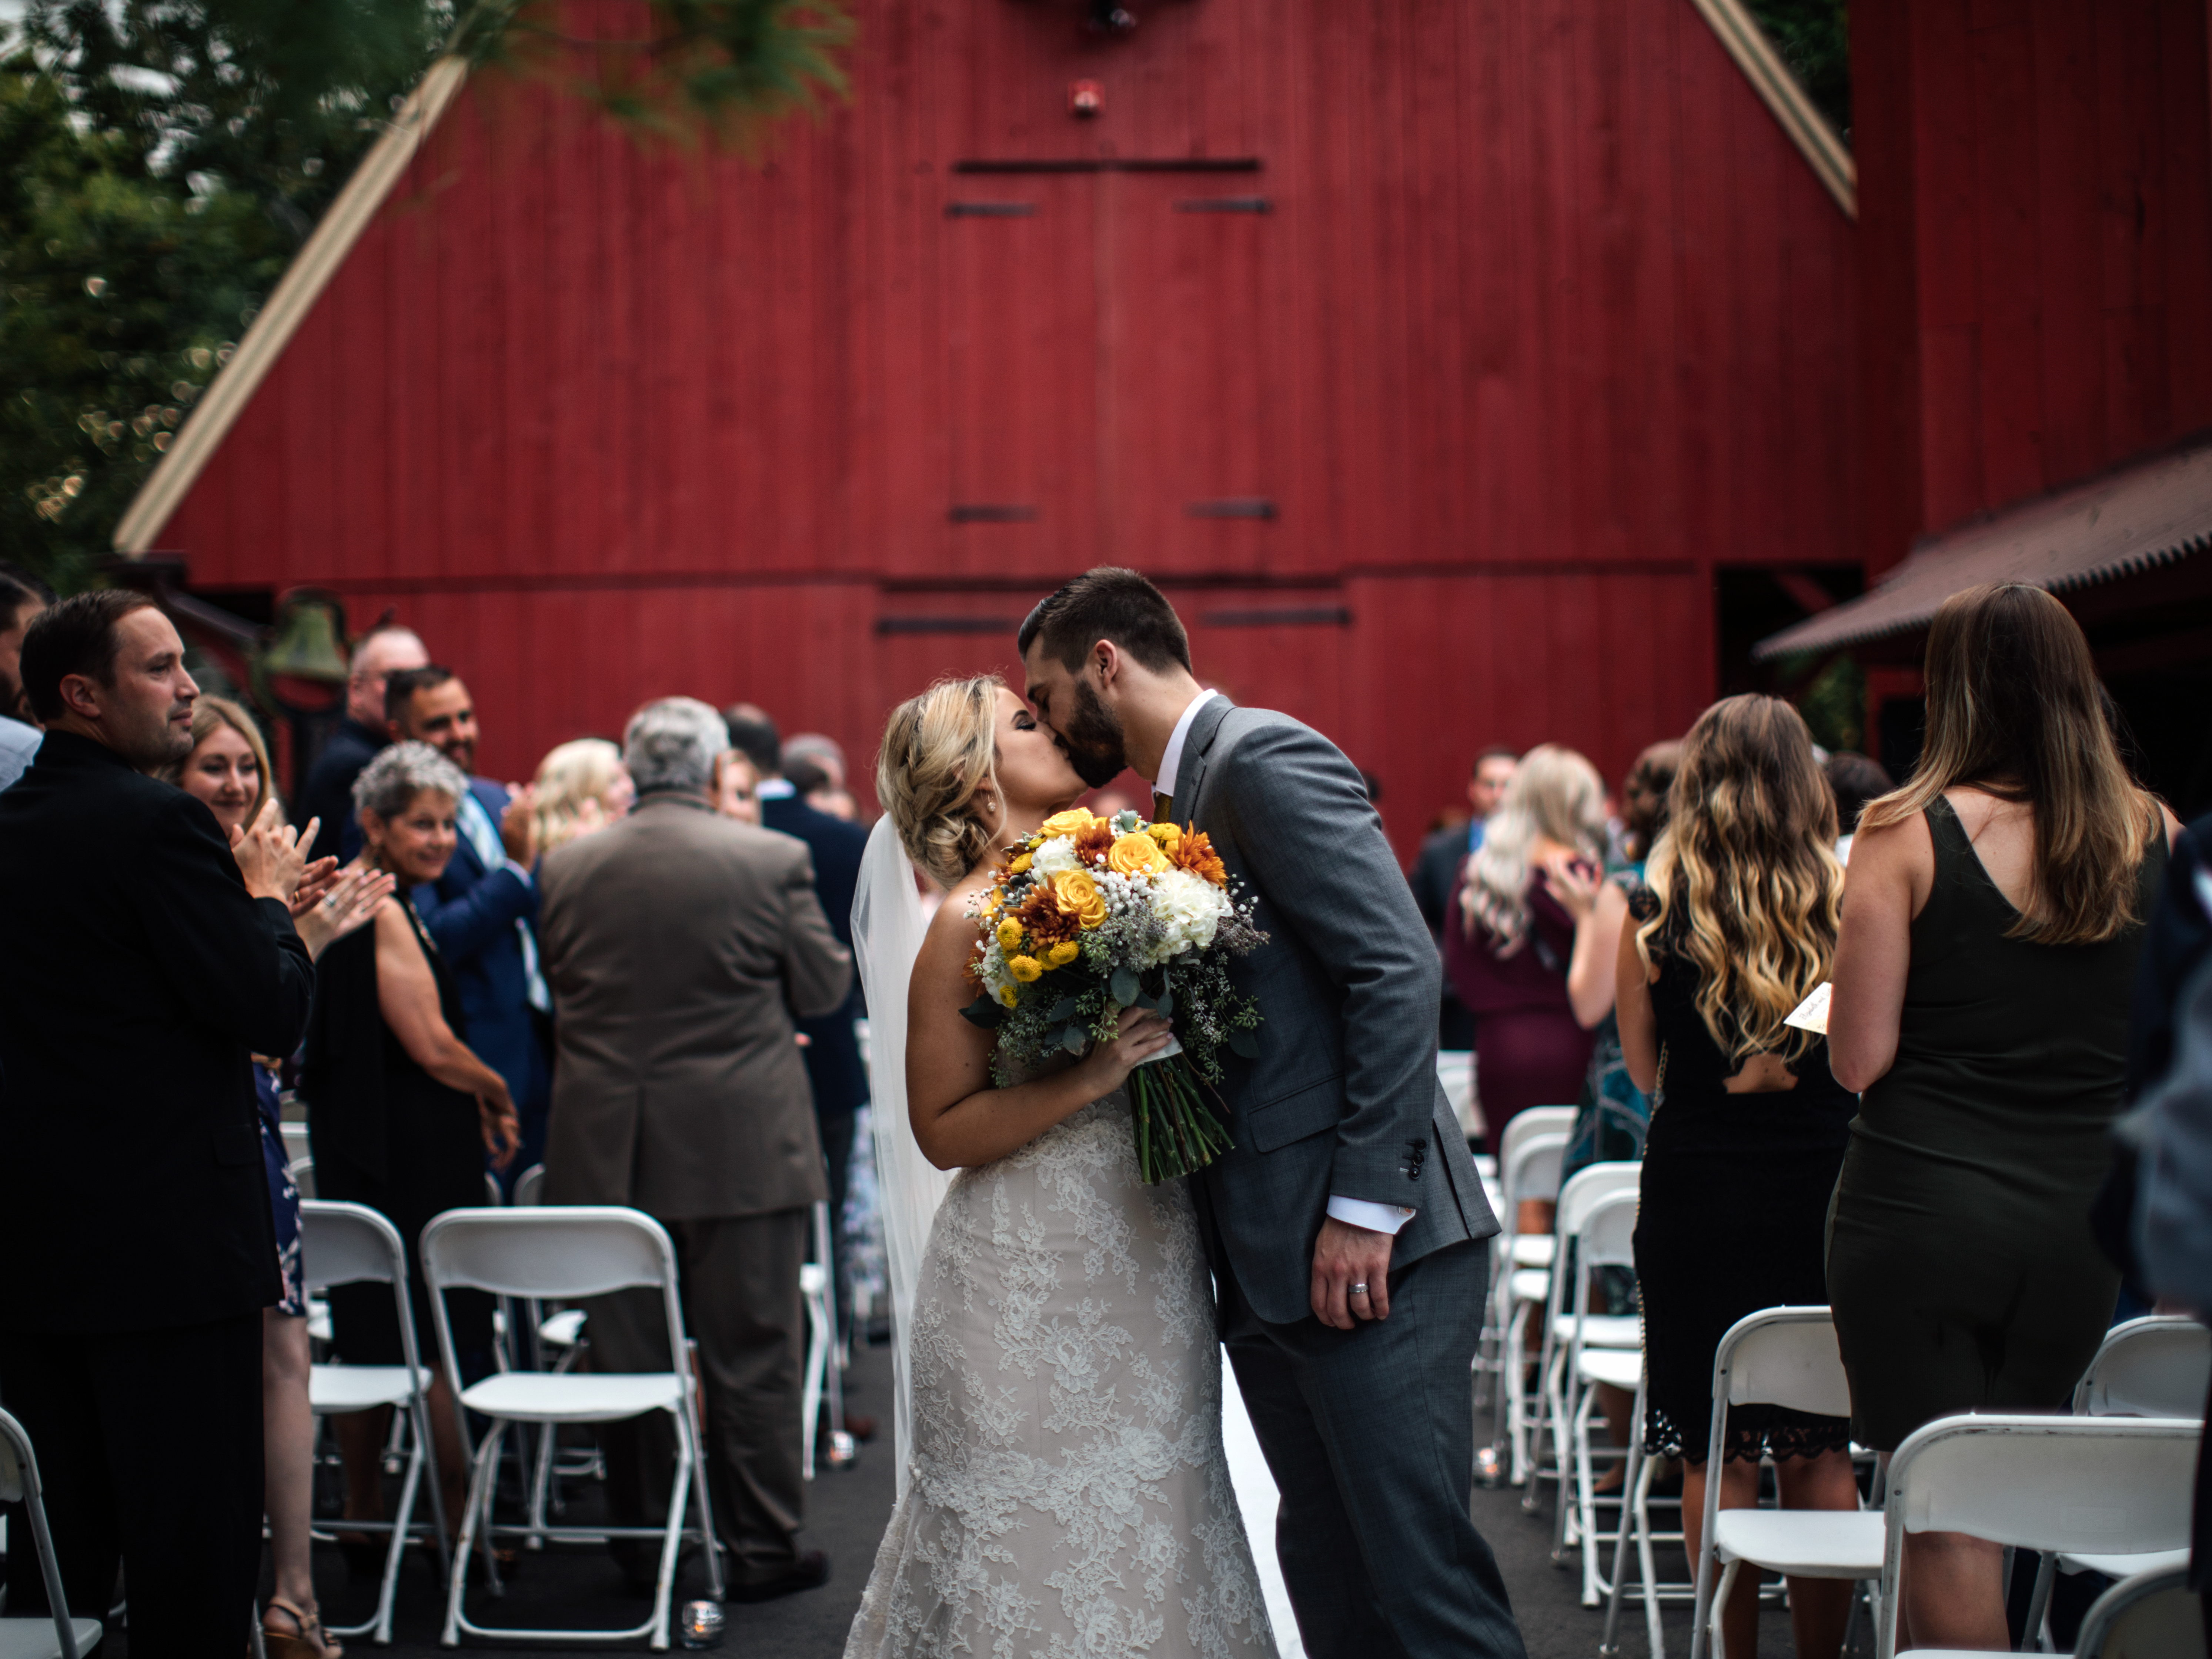 The red barn is a popular backdrop for wedding ceremonies.